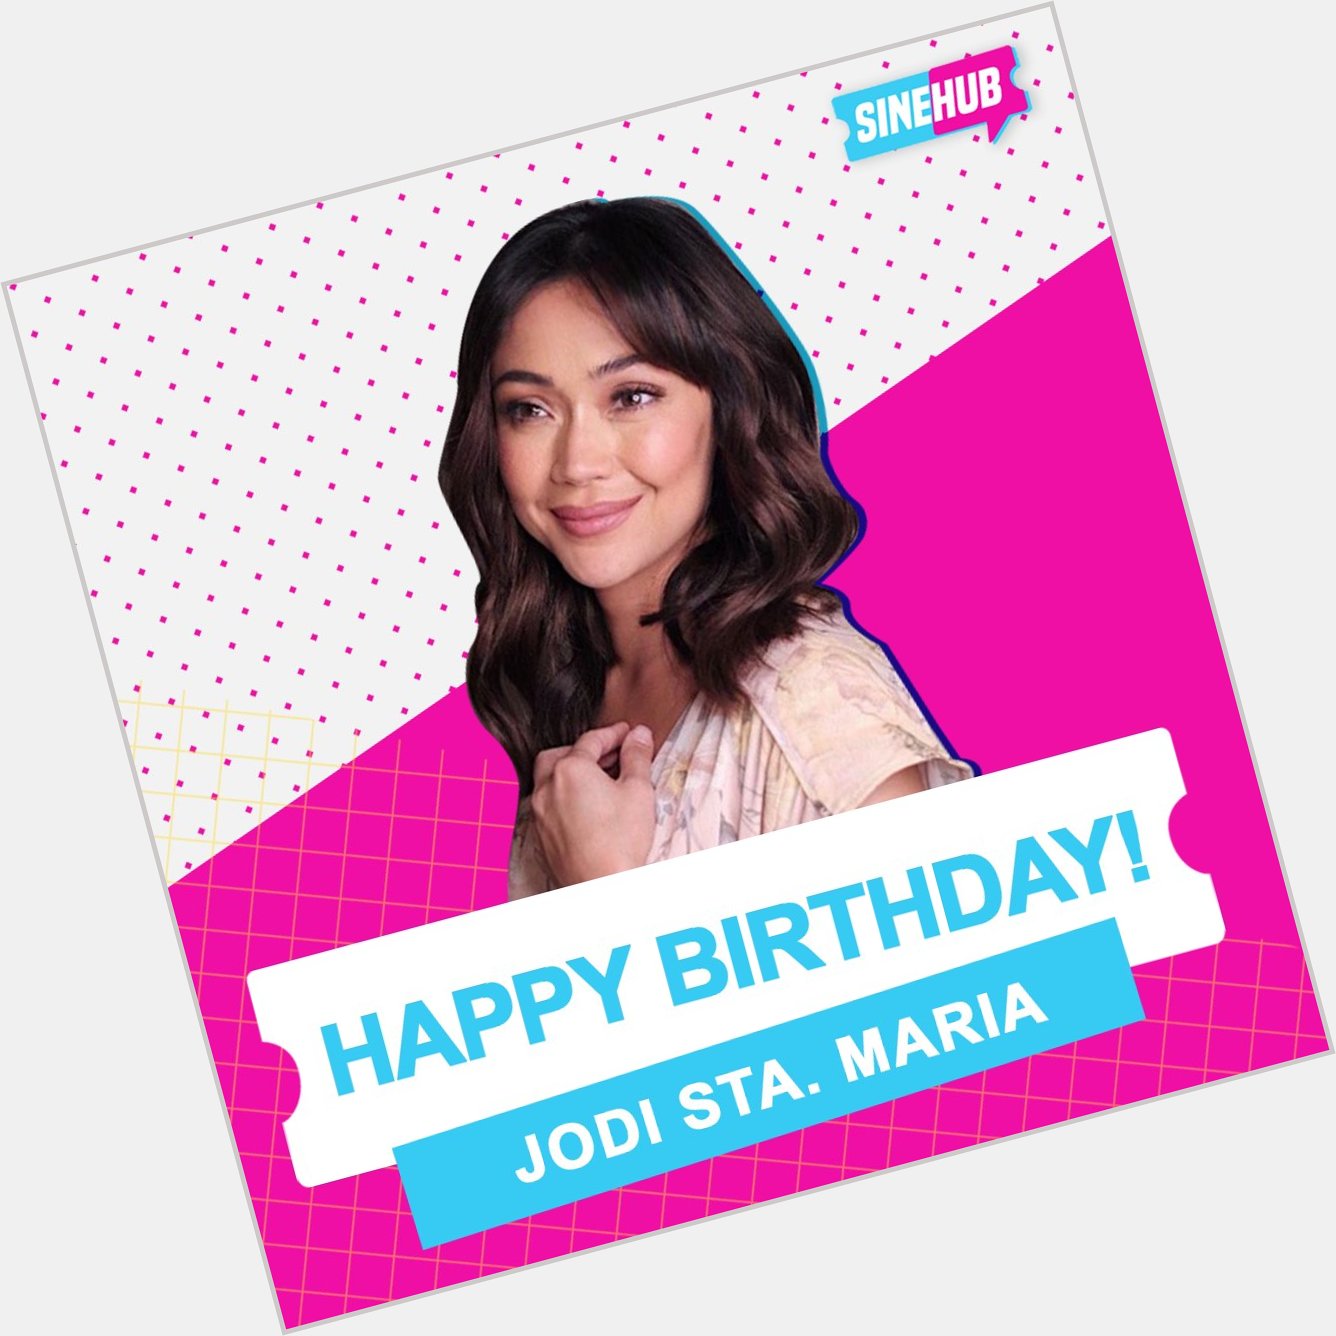 Happy birthday to the essence of grace and beauty! Cheers, Jodi Sta. Maria!  